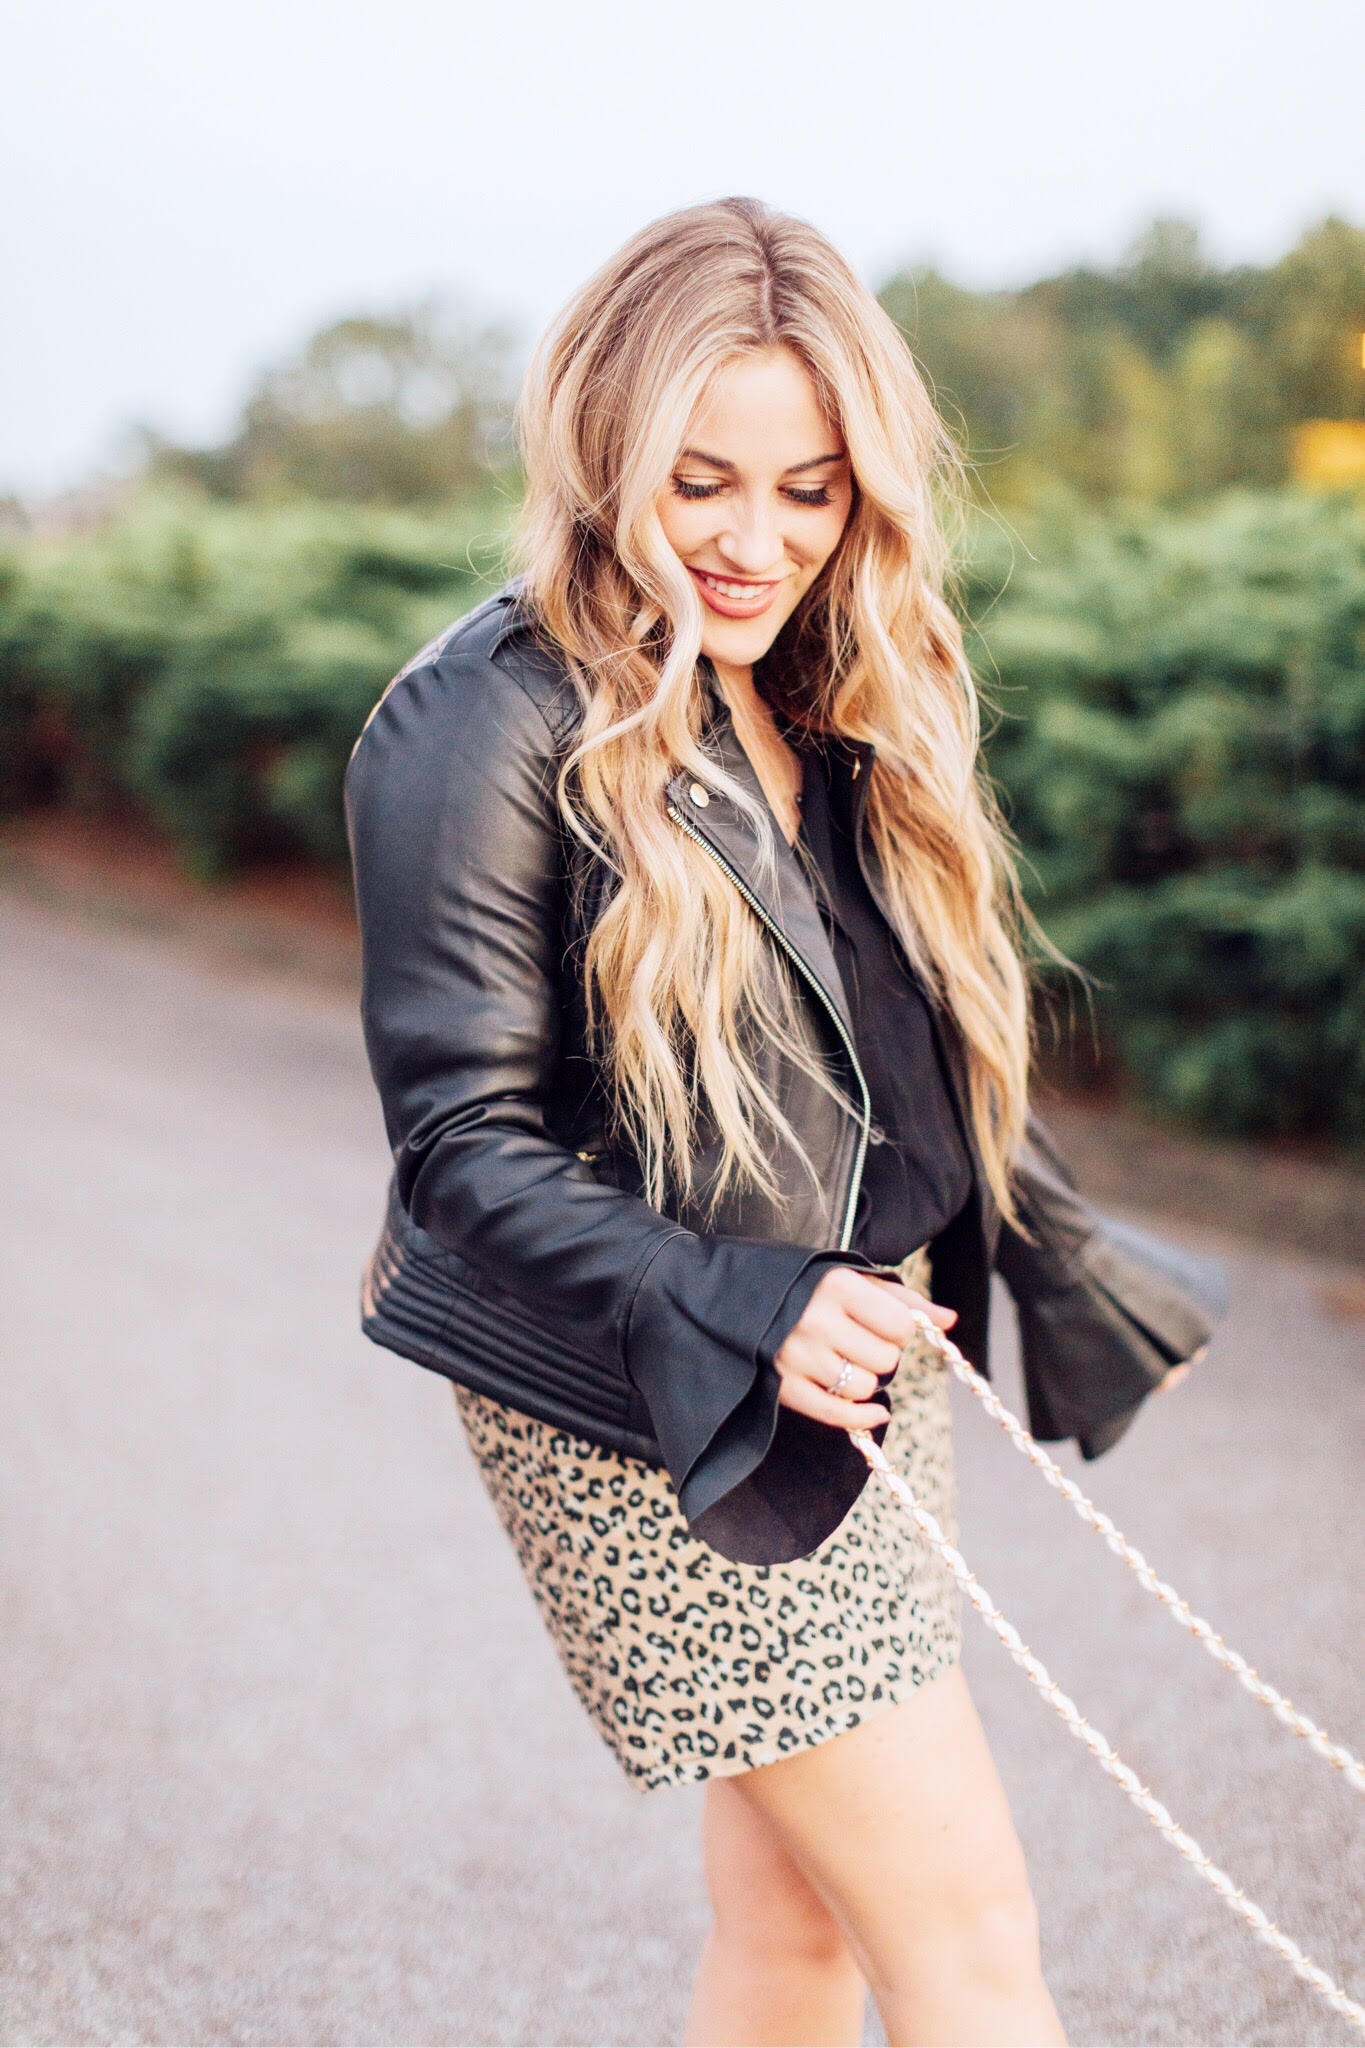 Fall layers with cheetah skirt styled by top fashion blog, Walking in Memphis in High Heels